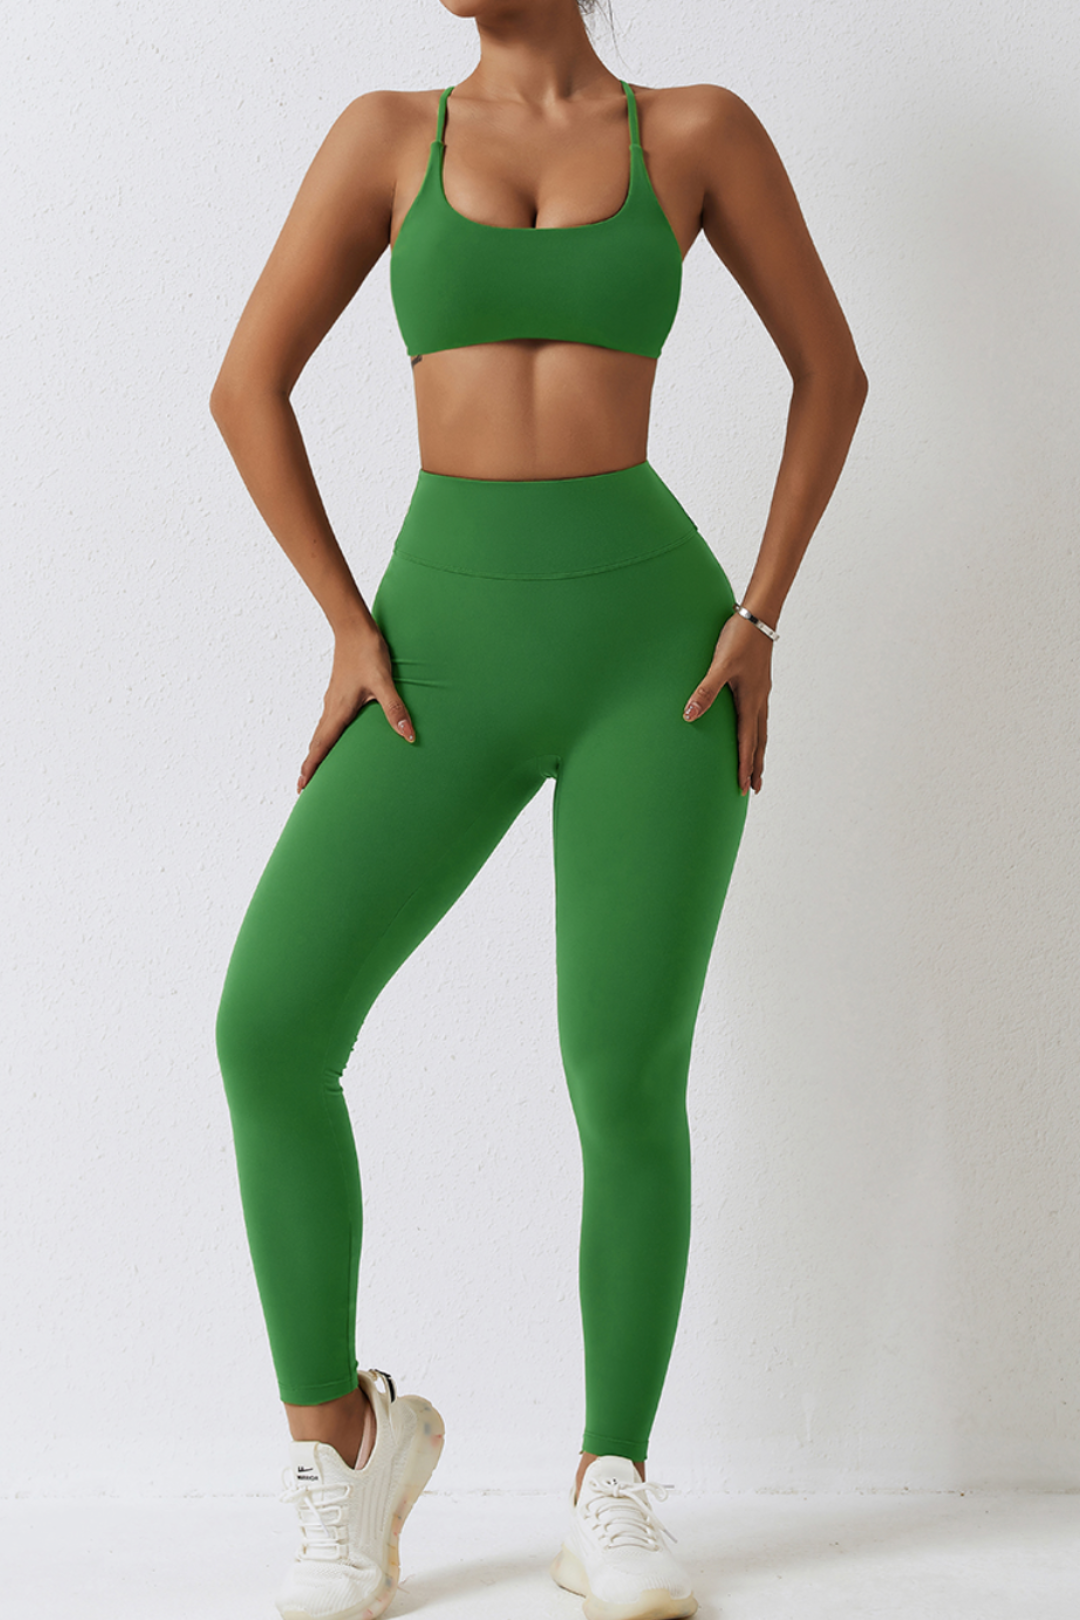 Lildy New Sexy Teal Green “ “ ” Chic Leggings Size M - $13 (27% Off Retail)  - From Darma